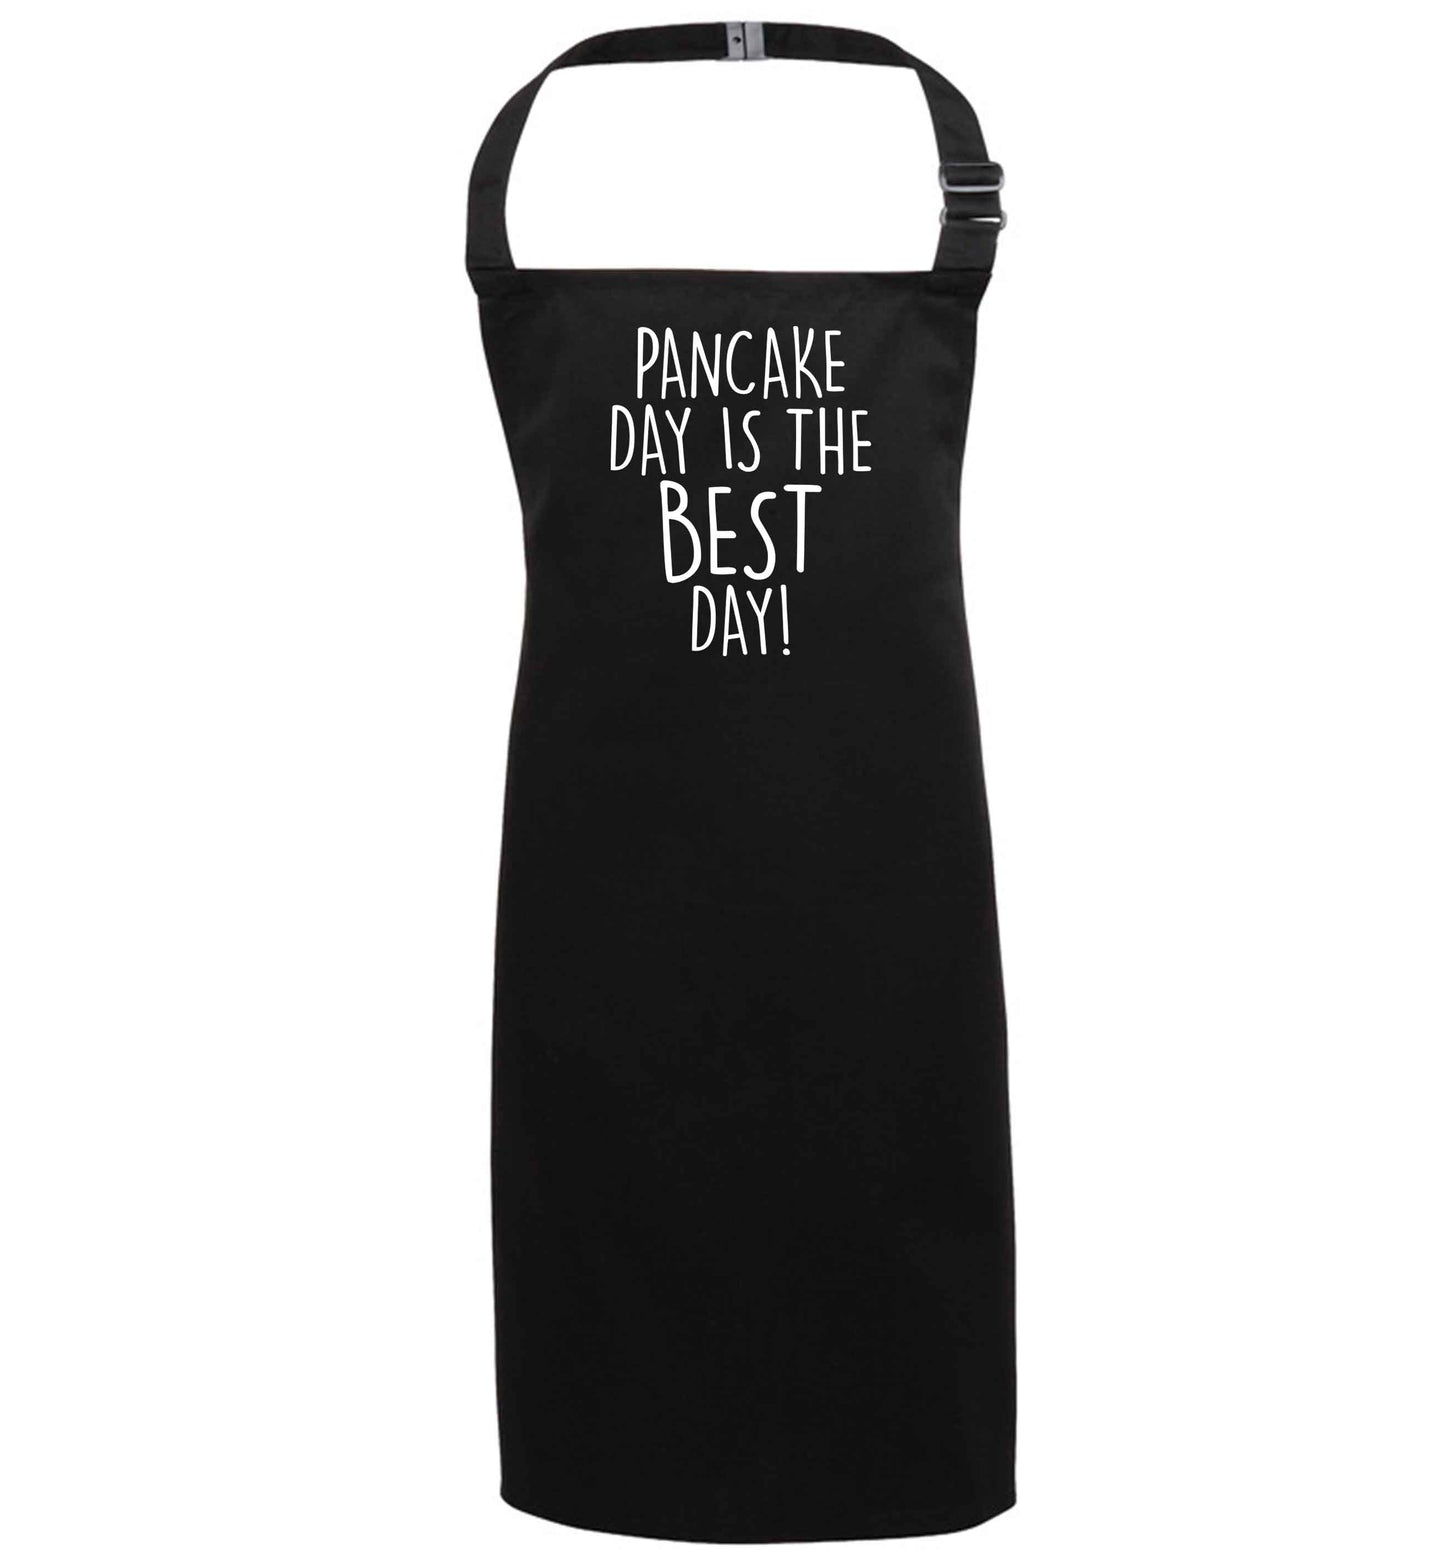 Pancake day is the best day black apron 7-10 years